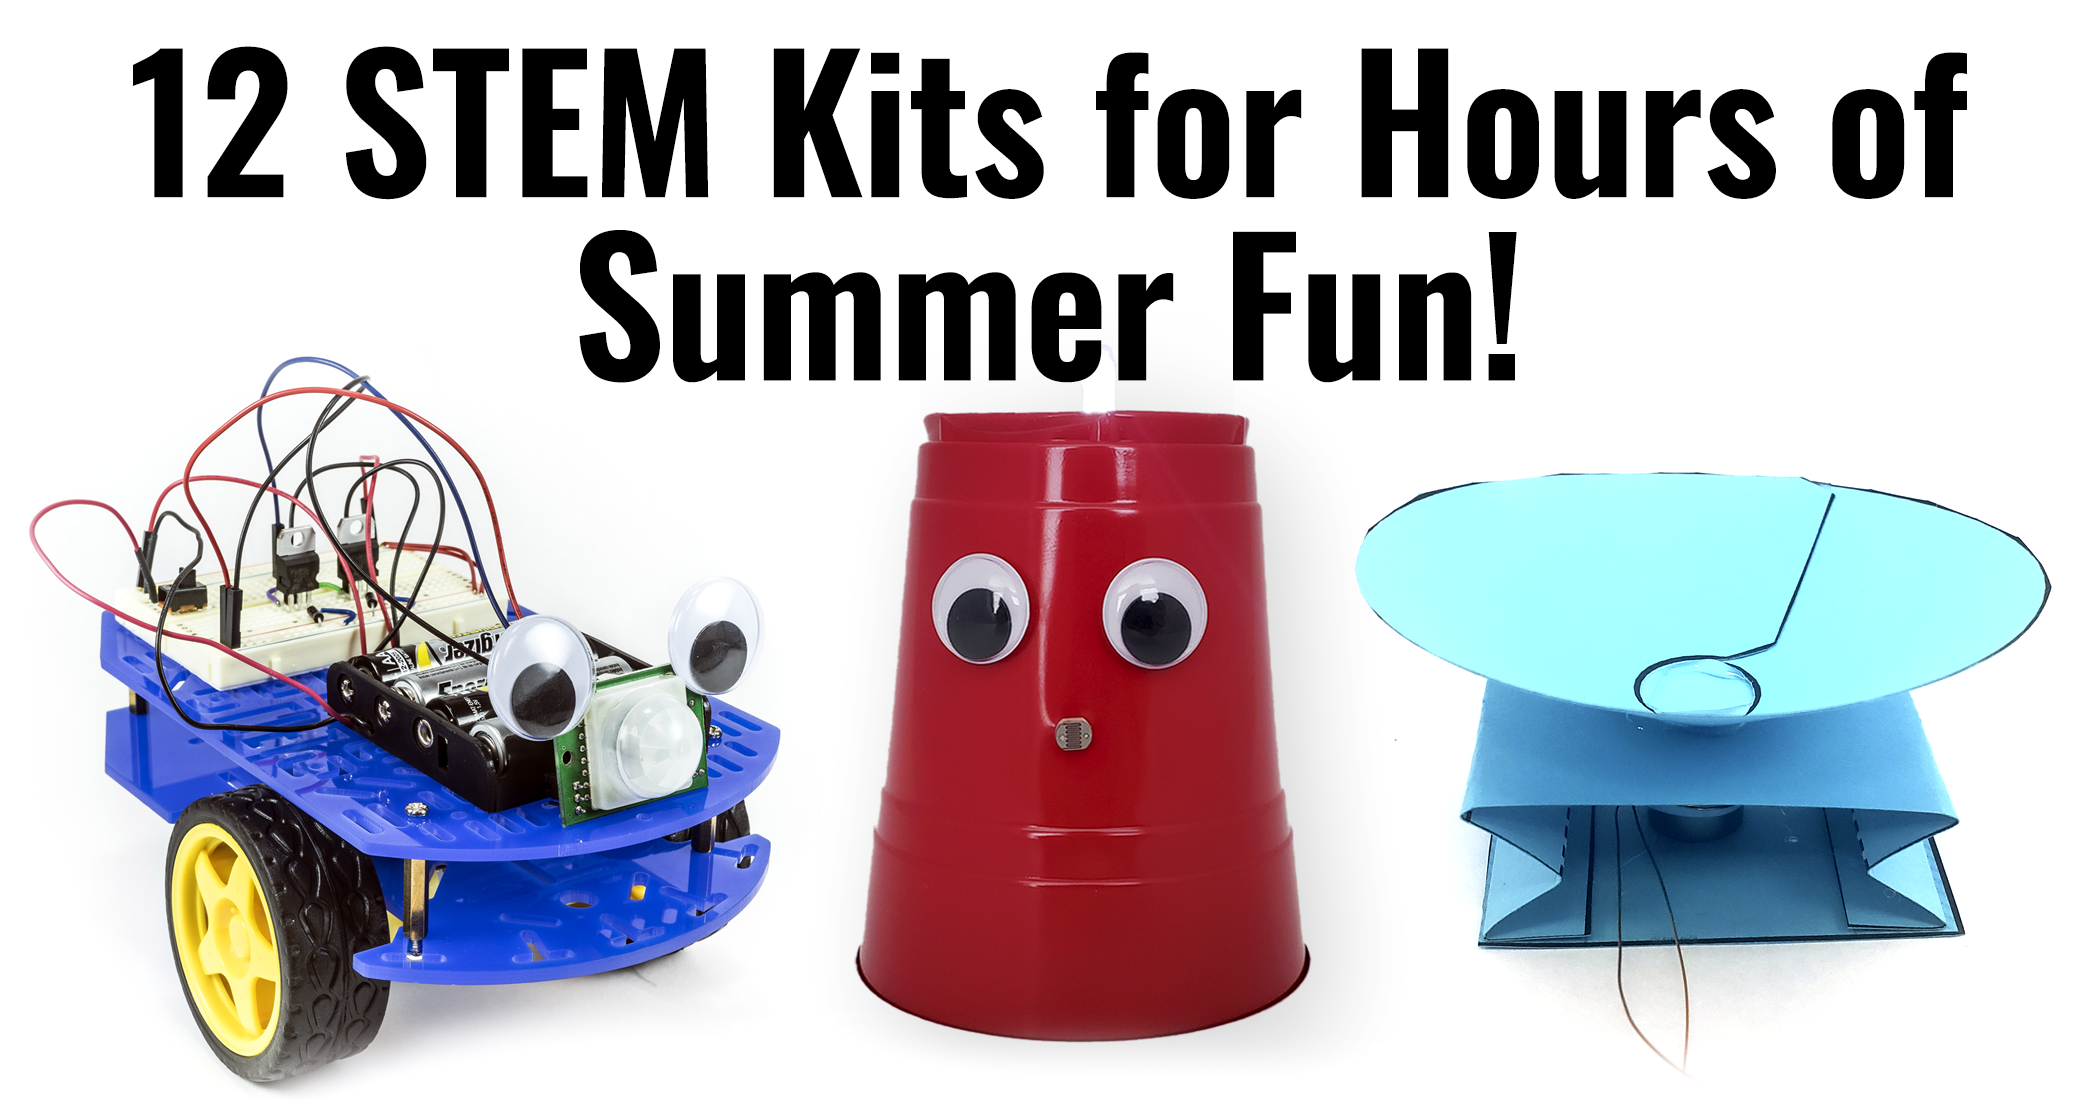 Images of bluebot robot, plastic cup night-light, and paper speaker, 3 of 12 kits highlighted for summer science experiments